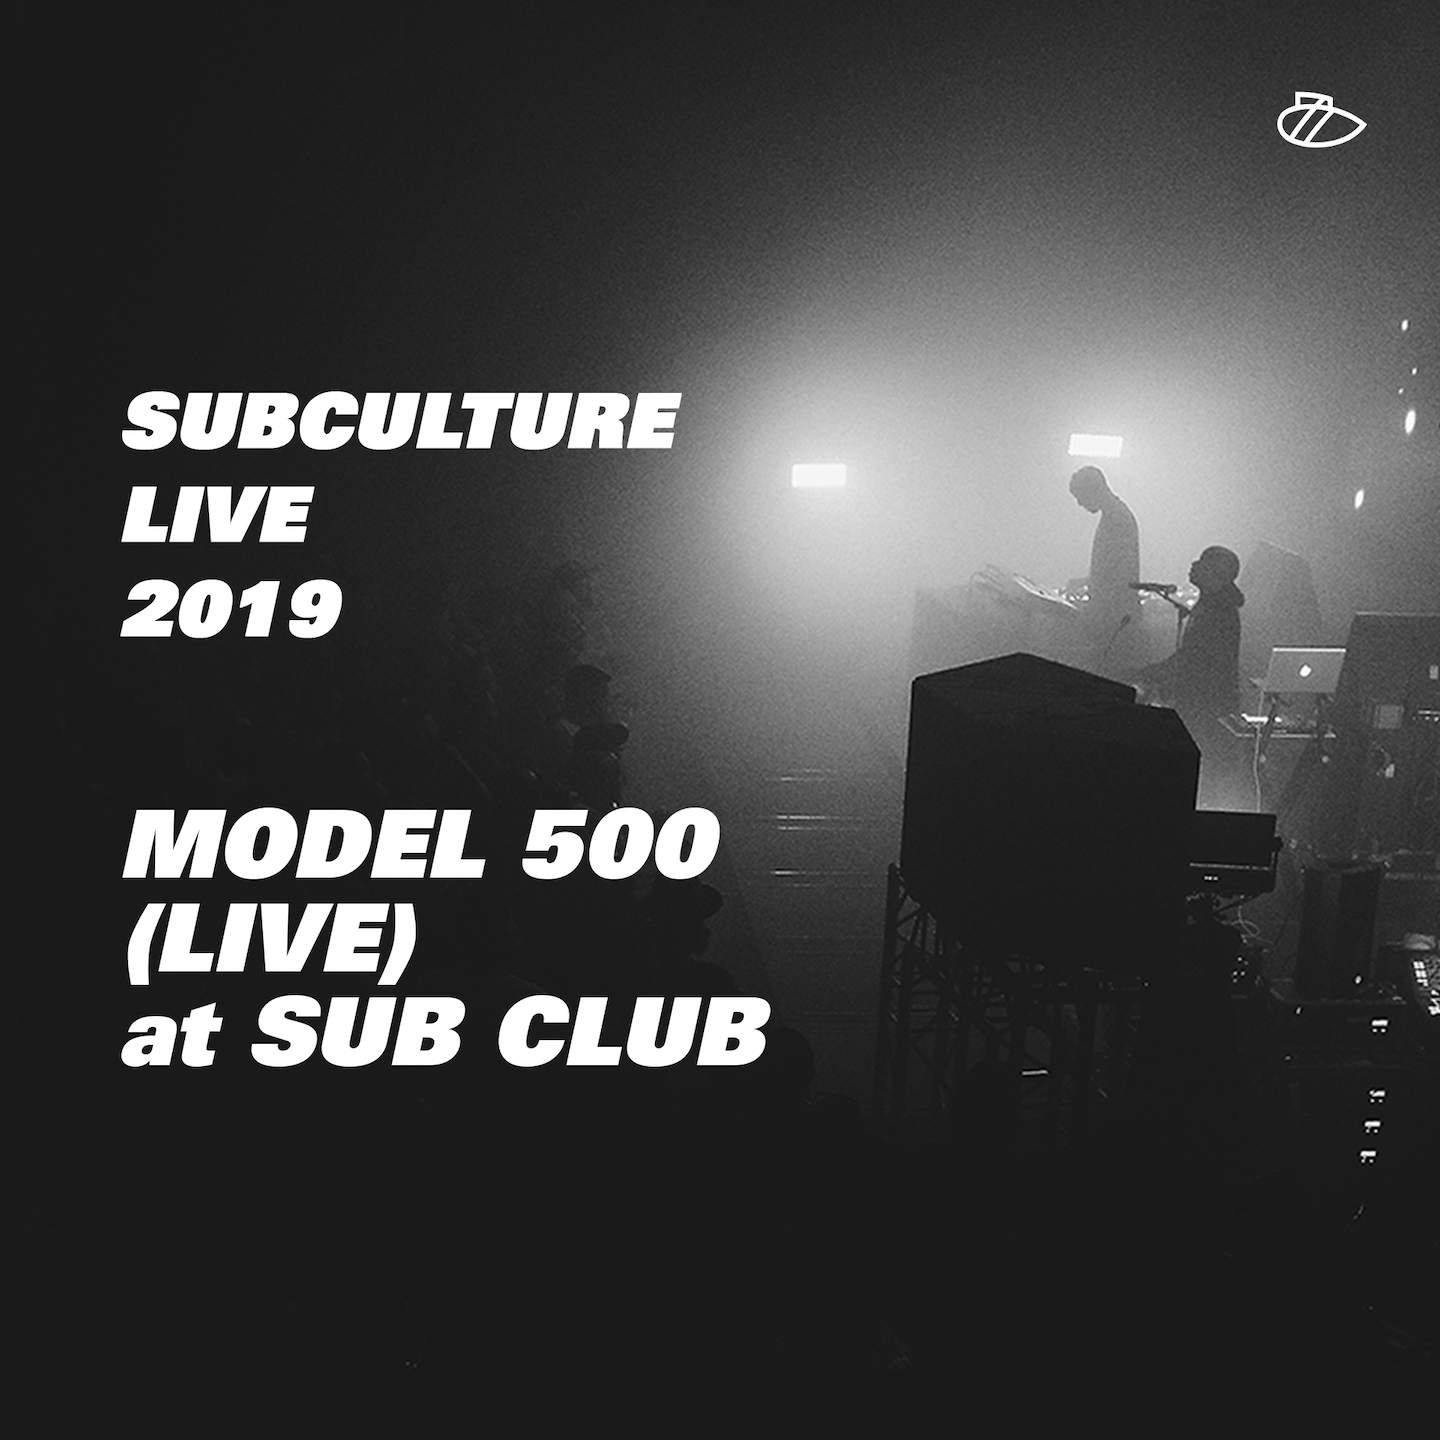 Sub Club launches new night, Subculture Live, with Model 500 image